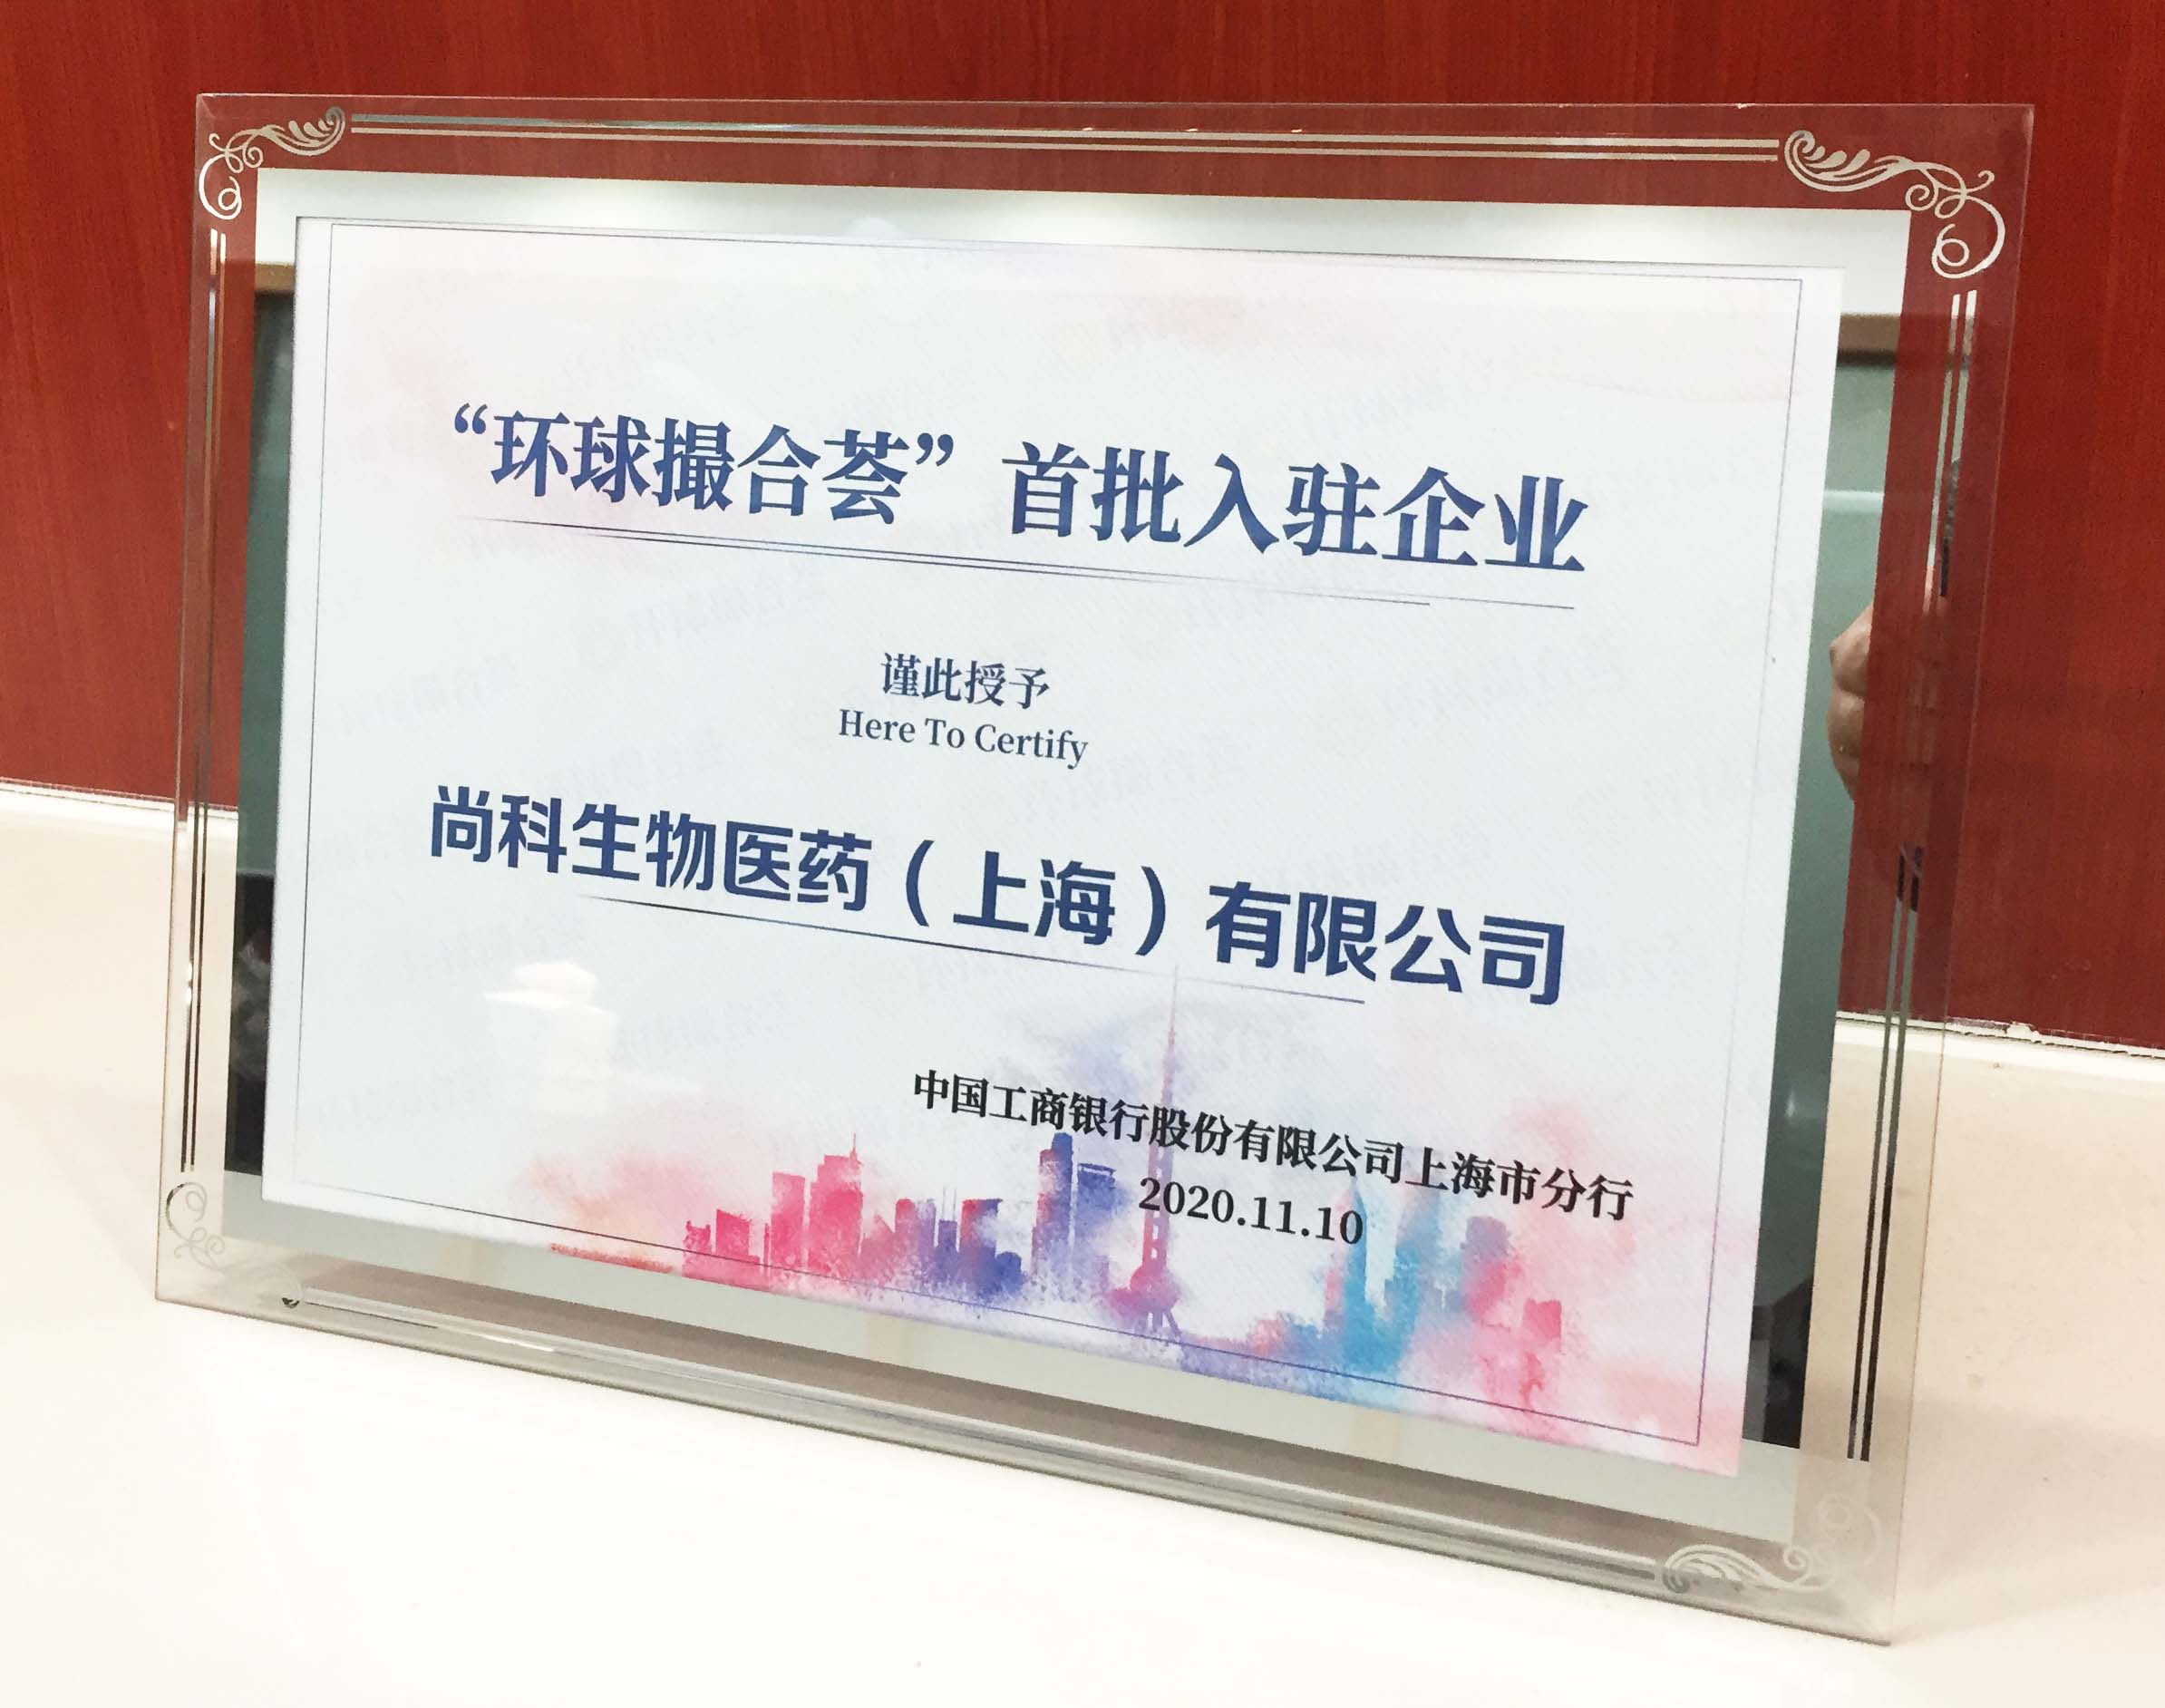 [During the Expo]: Shangke Bio won the title of the first batch of enterprises to settle in the "Global Matchmaking Club"